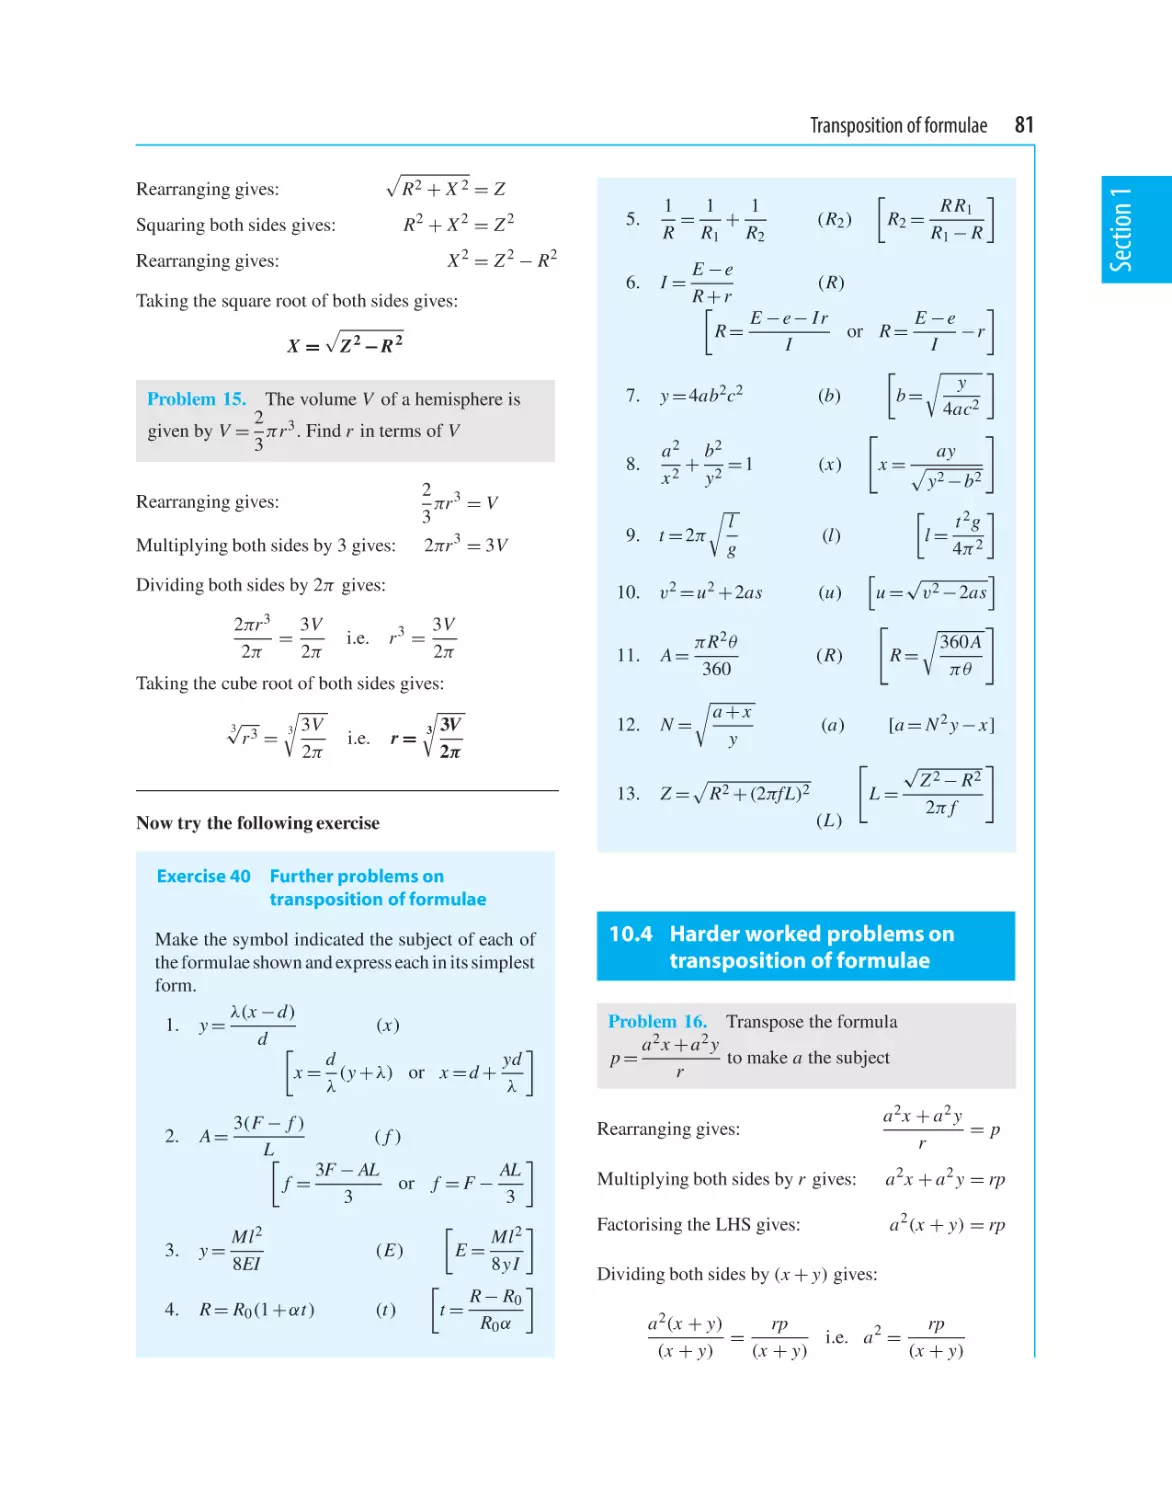 10.4 Harder worked problems on transposition of formulae